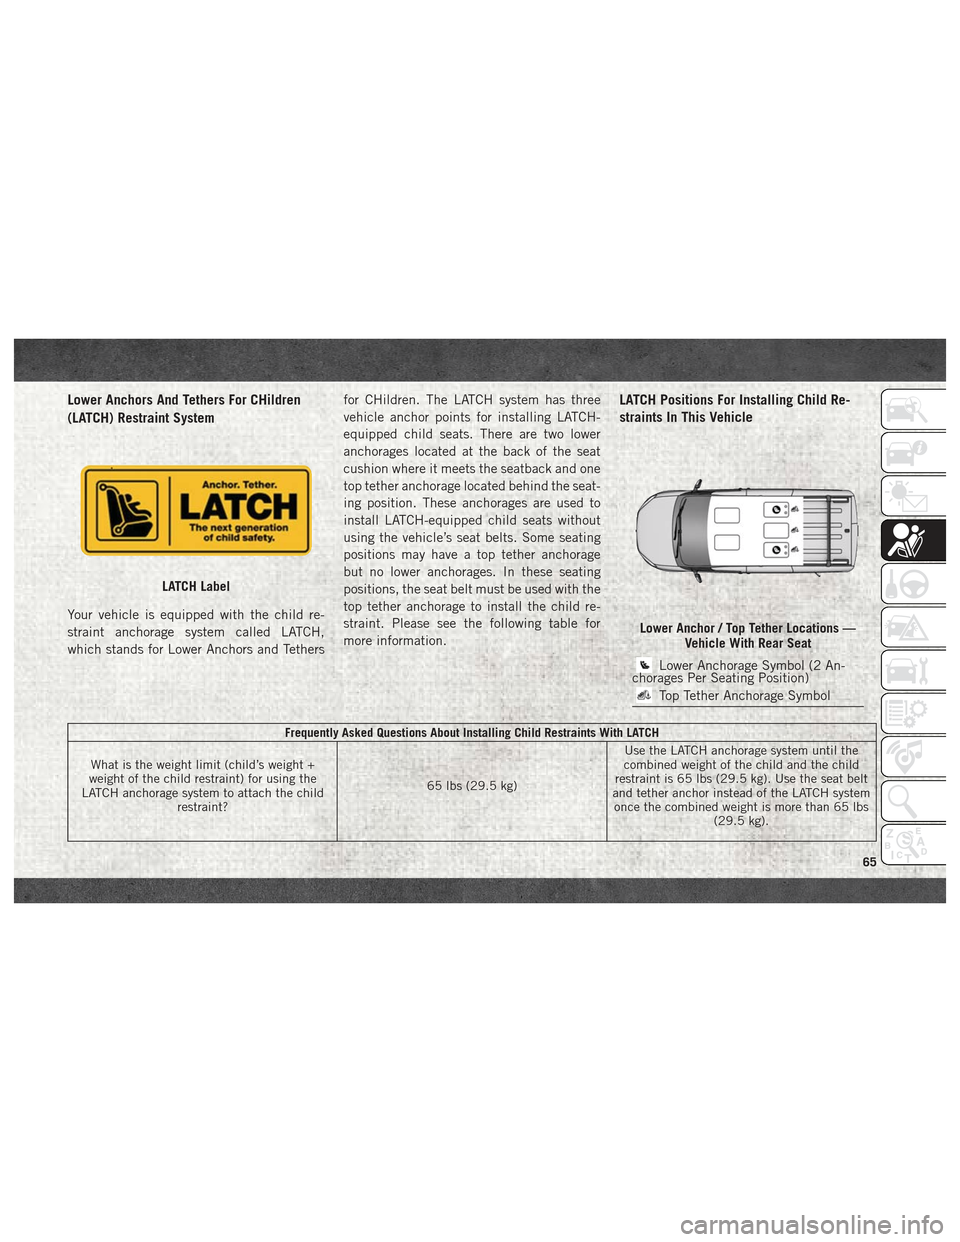 Ram ProMaster City 2018  User Guide Lower Anchors And Tethers For CHildren
(LATCH) Restraint System
Your vehicle is equipped with the child re-
straint anchorage system called LATCH,
which stands for Lower Anchors and Tethersfor CHildre